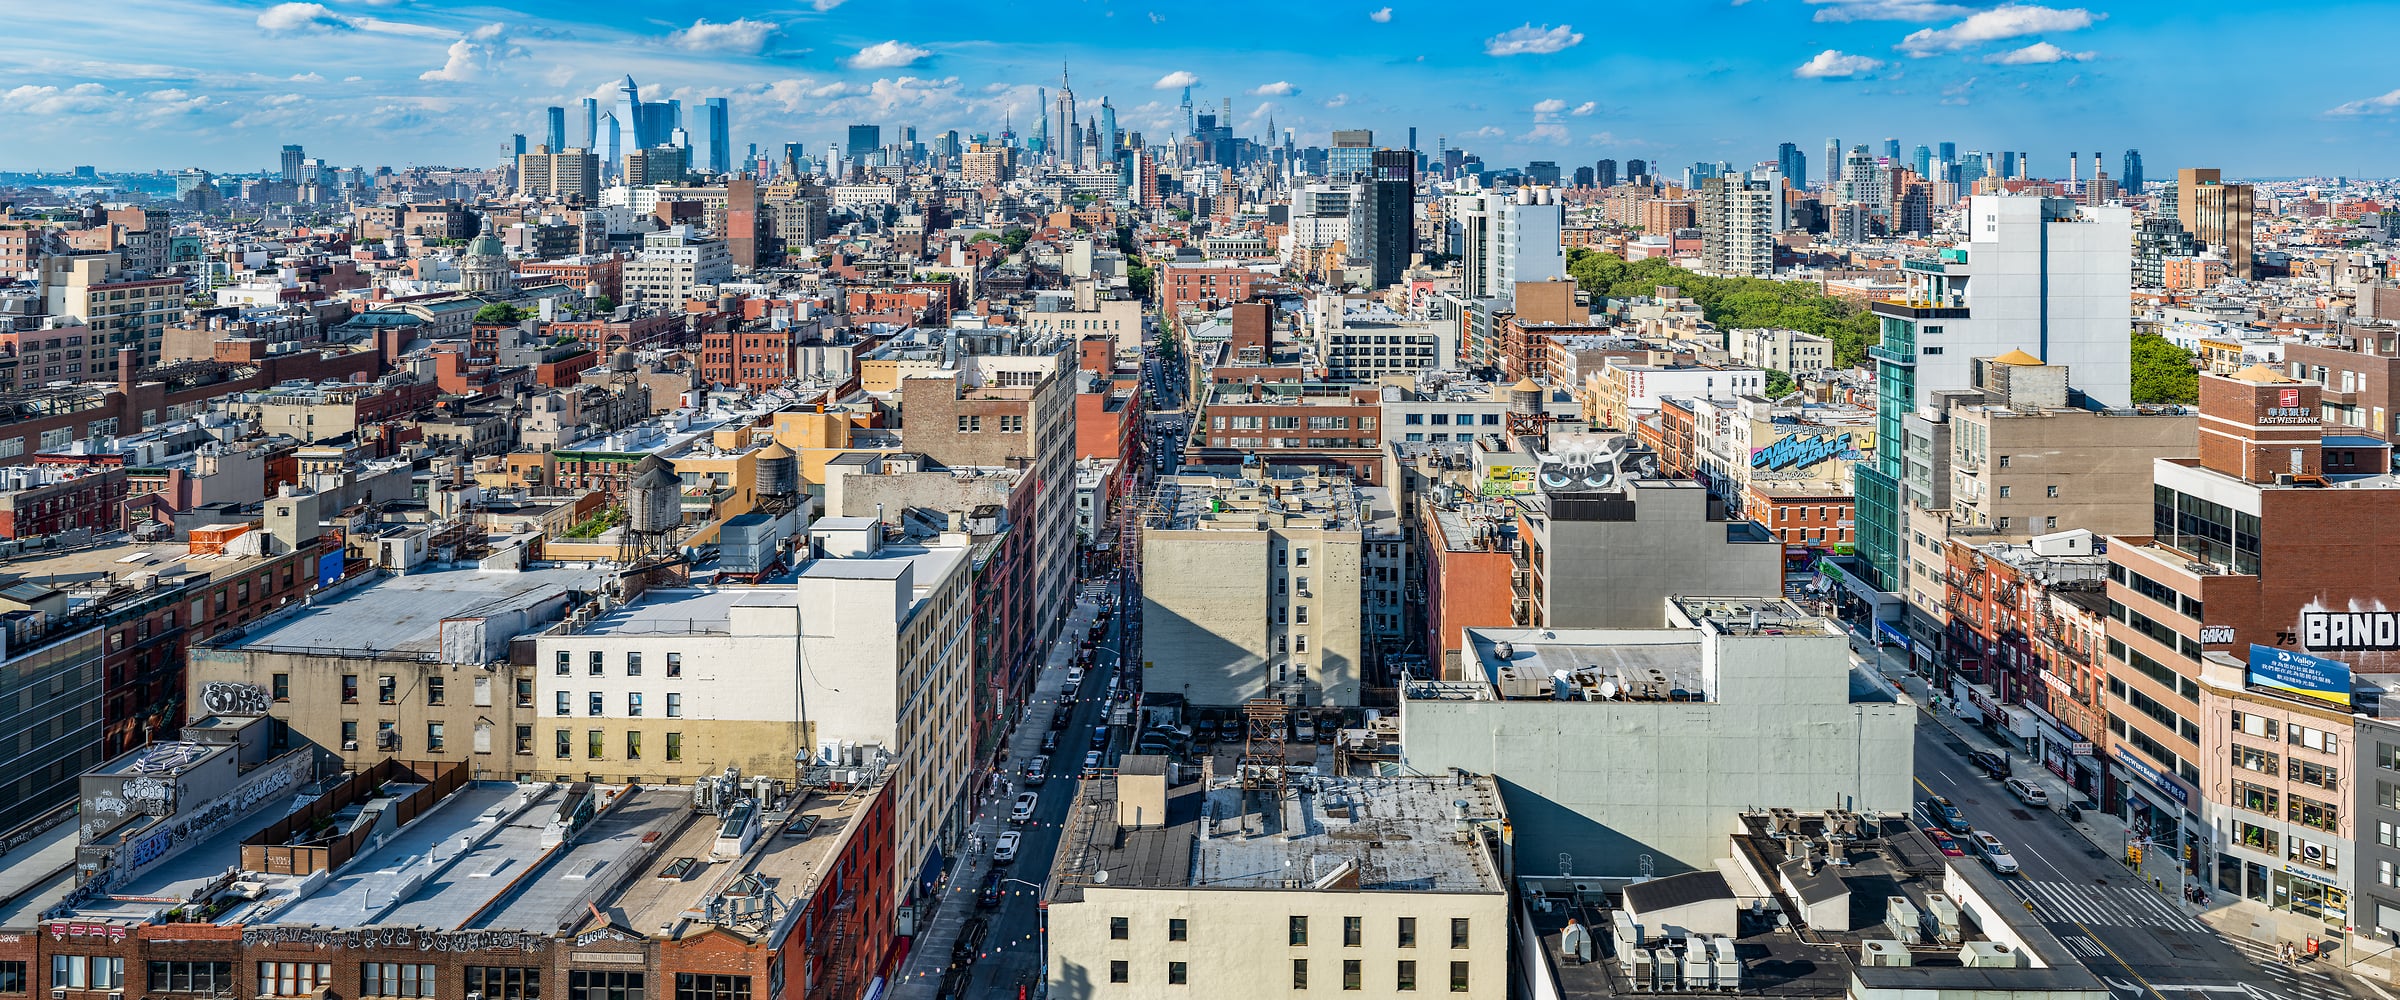 3,691 megapixels! A very high resolution, large-format panorama photo print of New York City during the daytime; cityscape photograph created by Tim Lo Monaco from Lower Manhattan, New York City, New York.